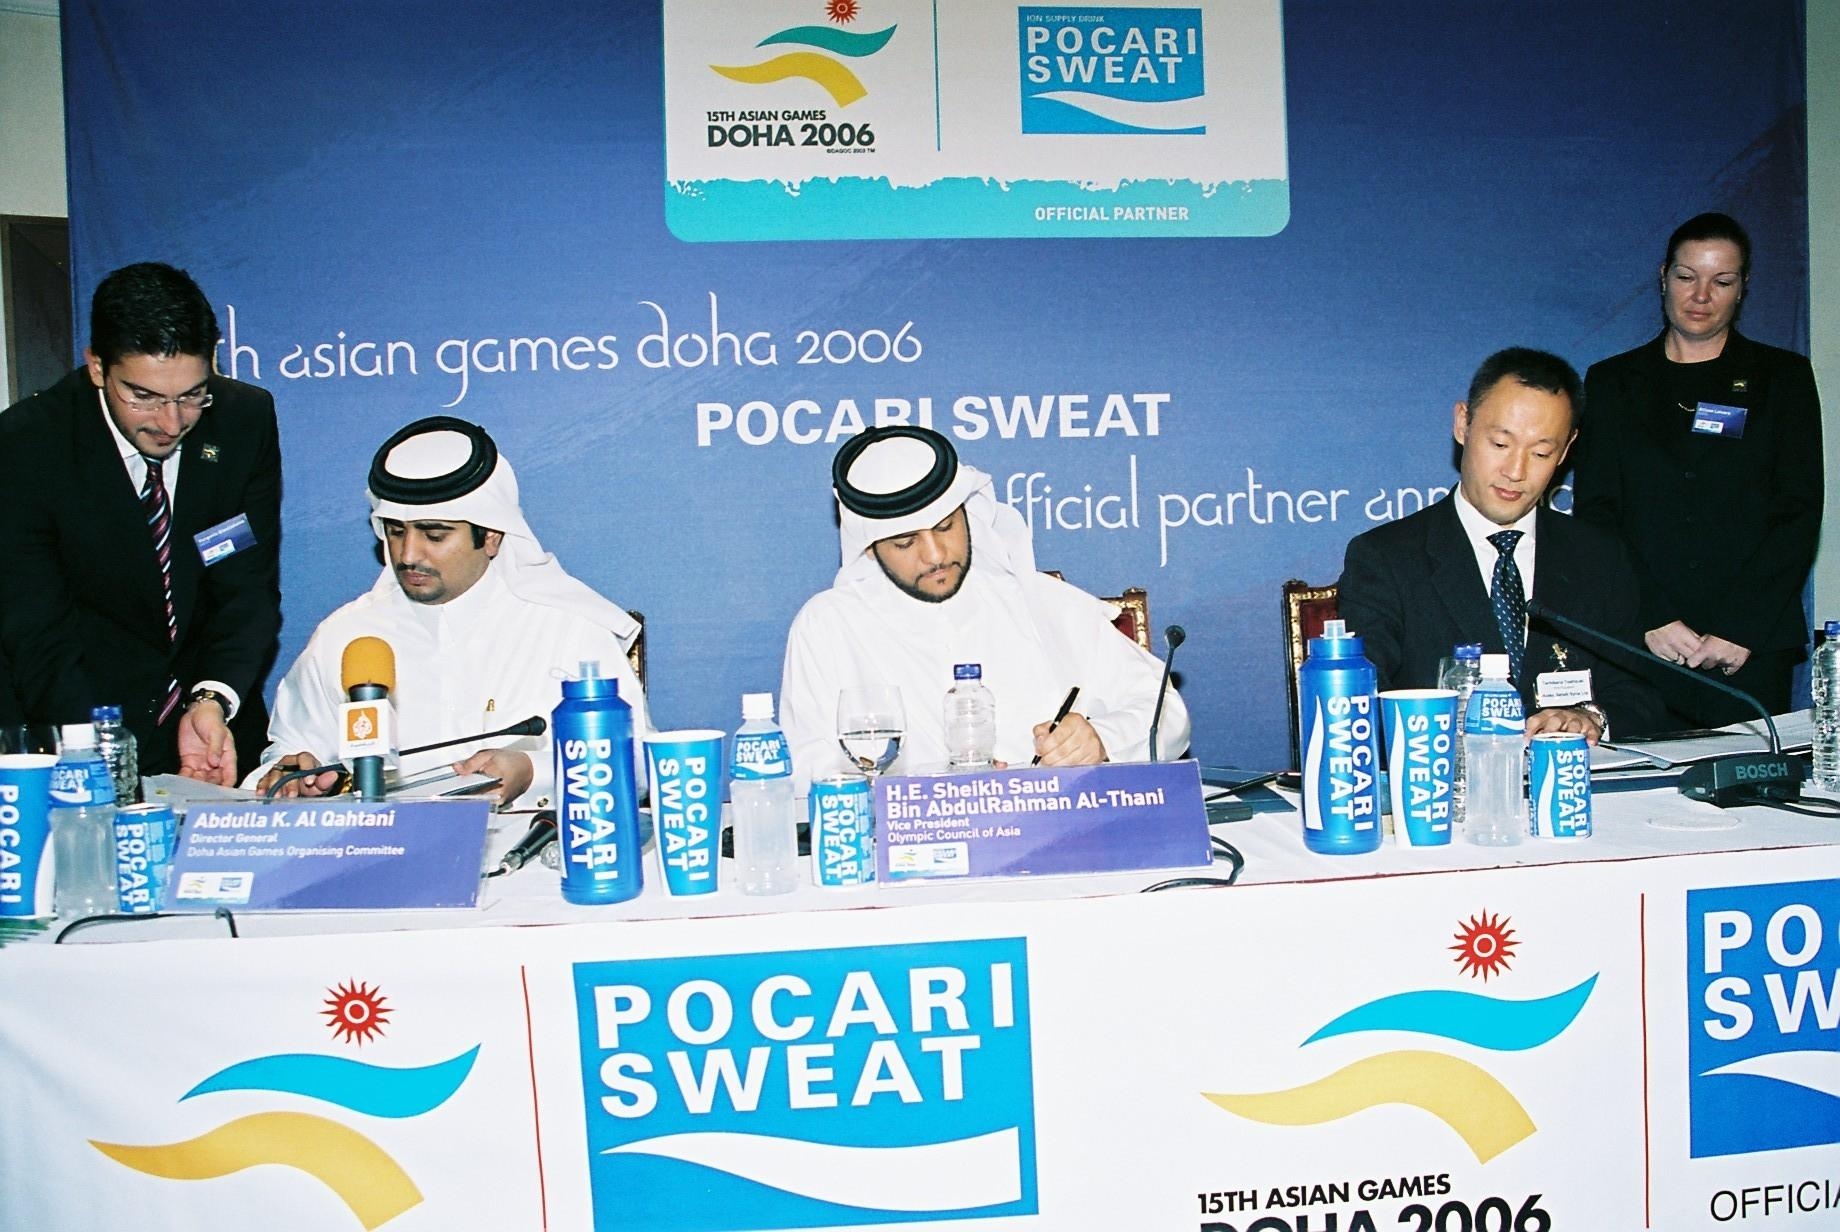 Bashir Mraish Consultancy implements a partnership between Pocari Sweat and the 2006 Doha Games Organizing Committee